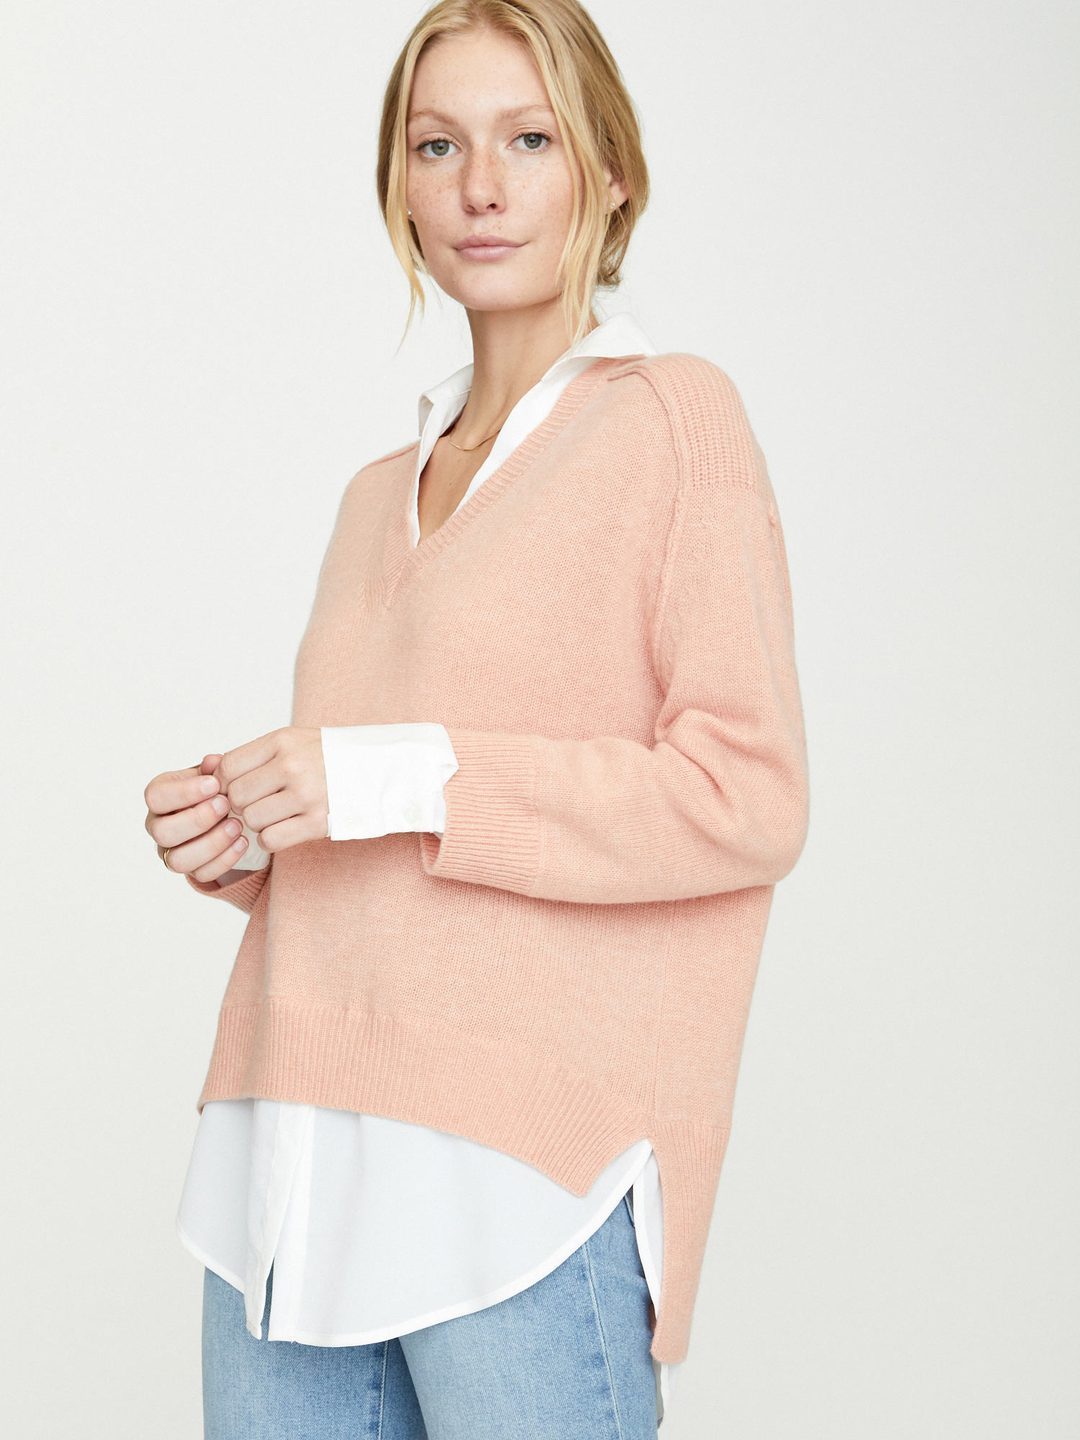 Brochu Walker - V-Neck Layered Pullover in Petra Coral w/ White